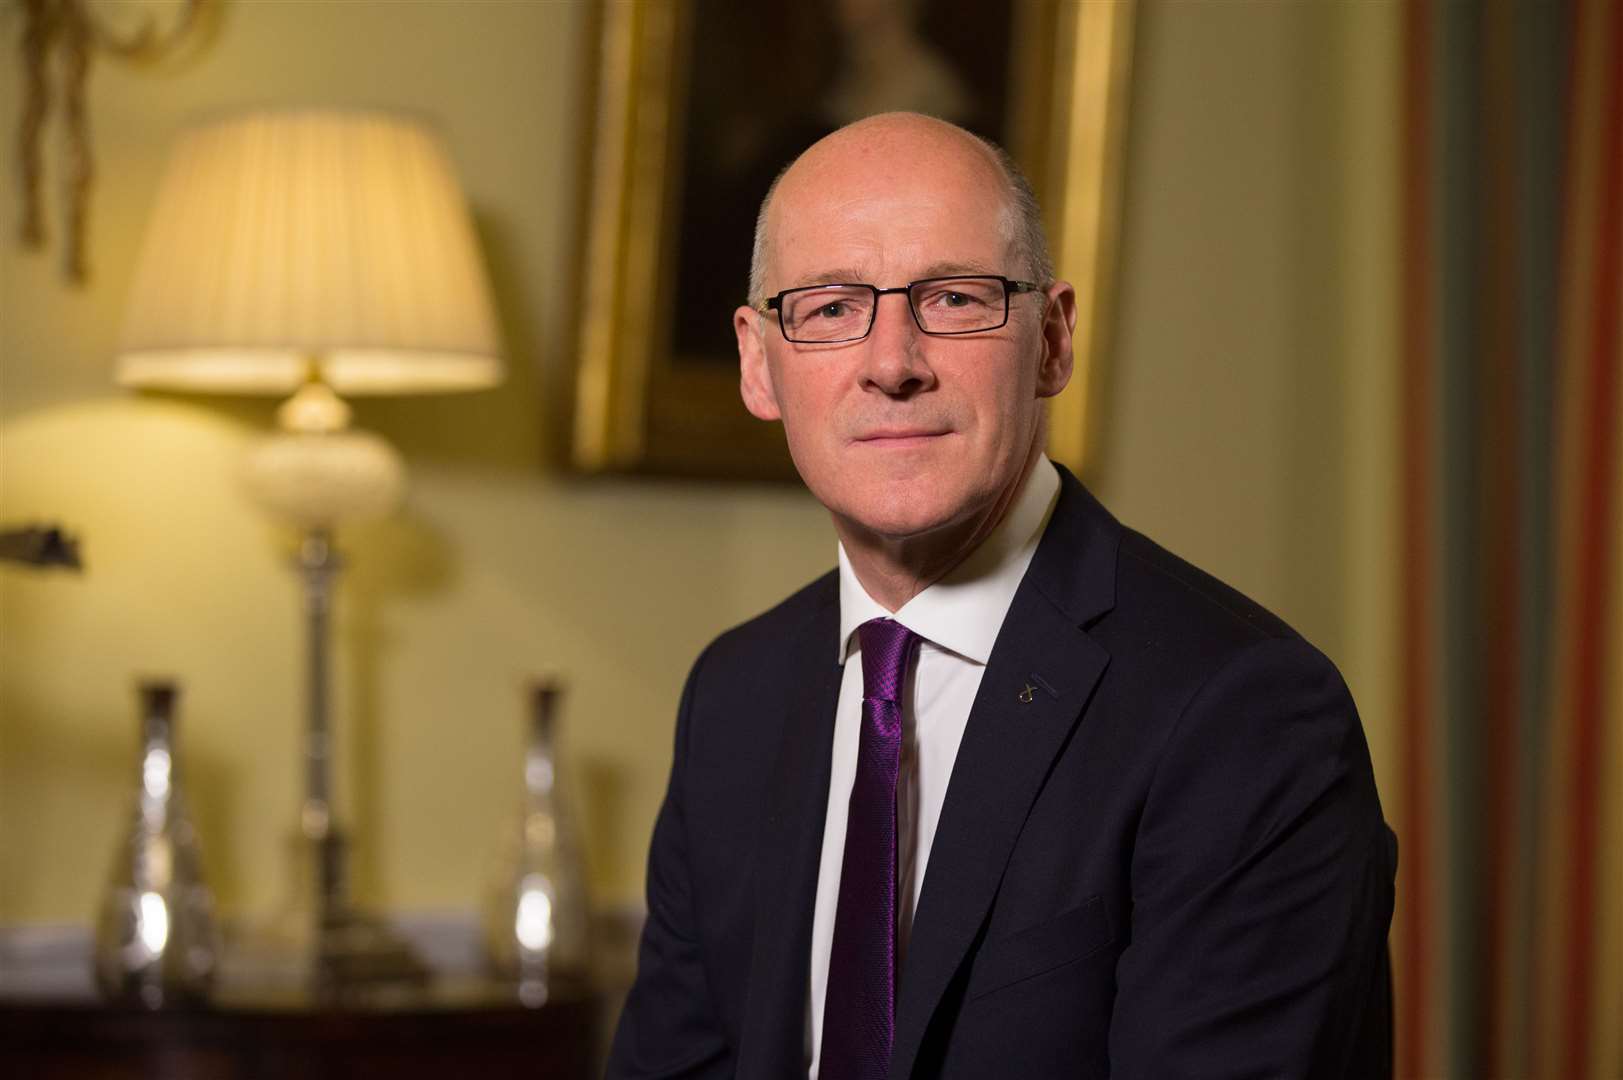 John Swinney confirmed that exam marks which were downgraded will now be marked based on estimations provided by schools.